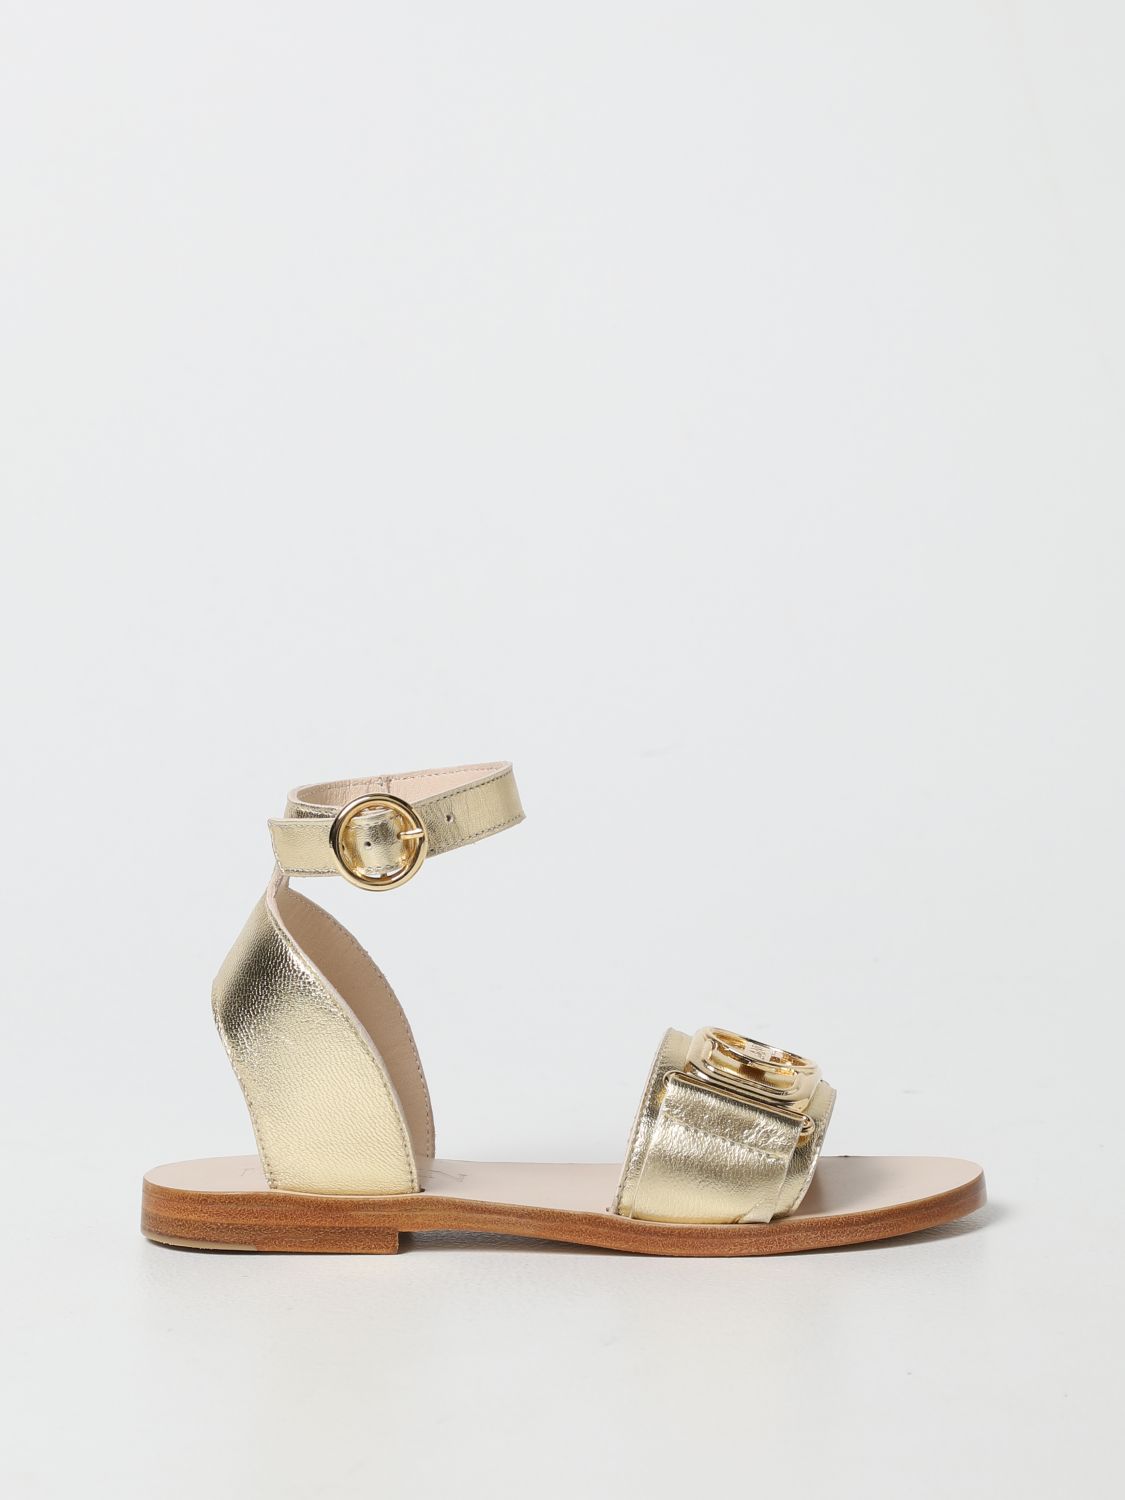 Lanvin Laminated Leather Sandals In Gold | ModeSens